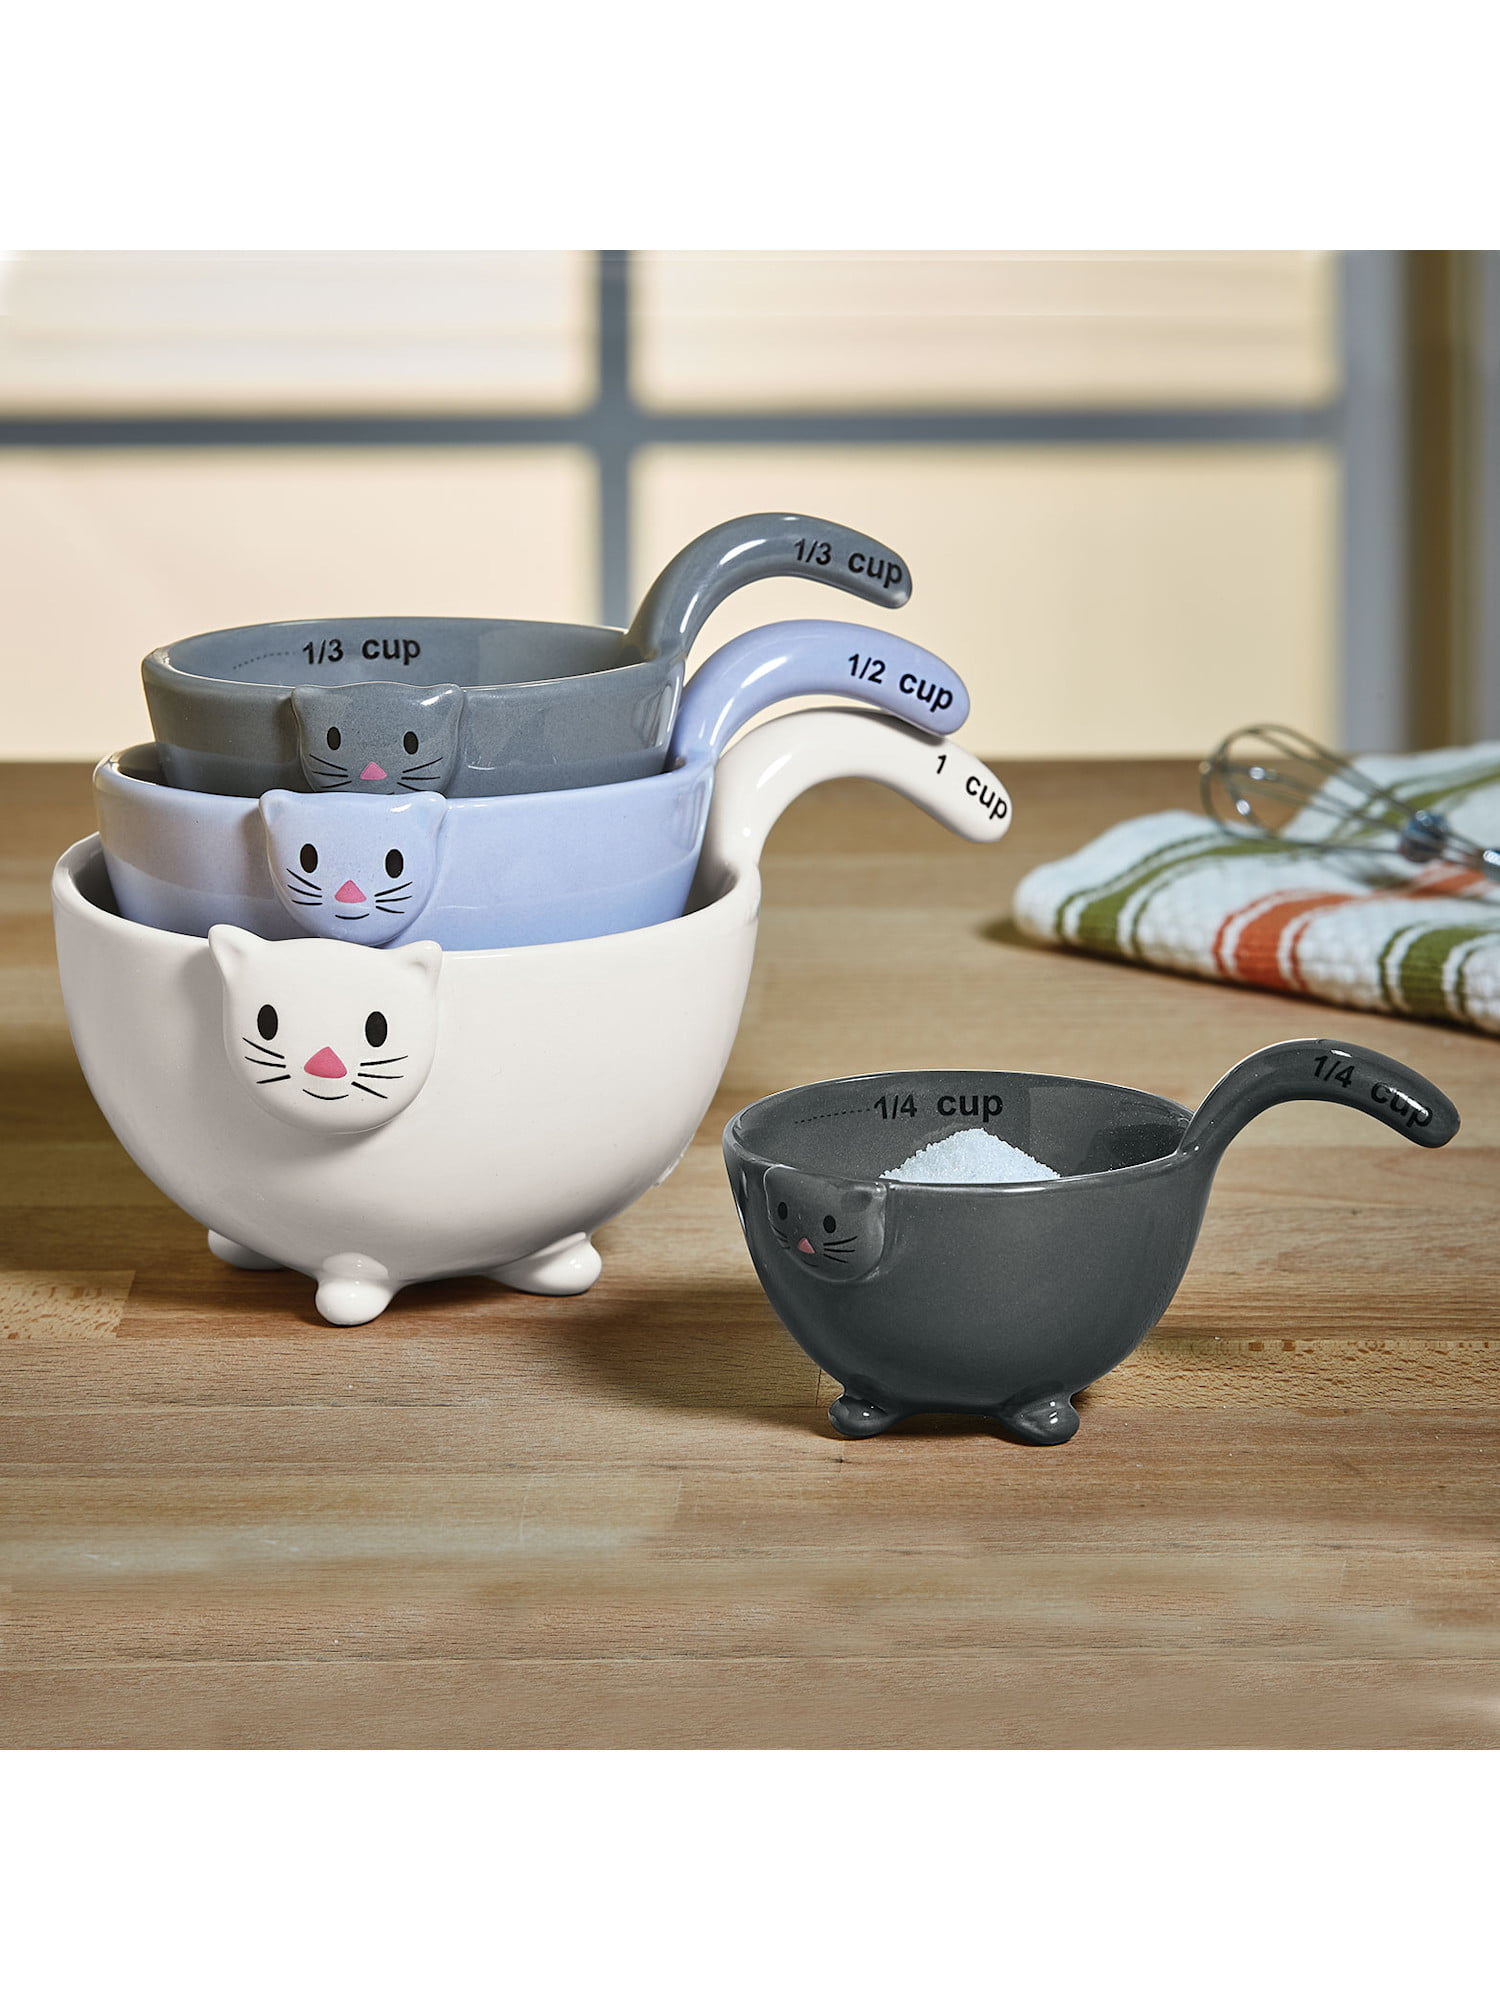 White Ceramic Cat Measuring Cups: Set of Cat Shaped Bowls 1/2 Cup 1/3 Cup and 1/4 Cup 1 Cup 